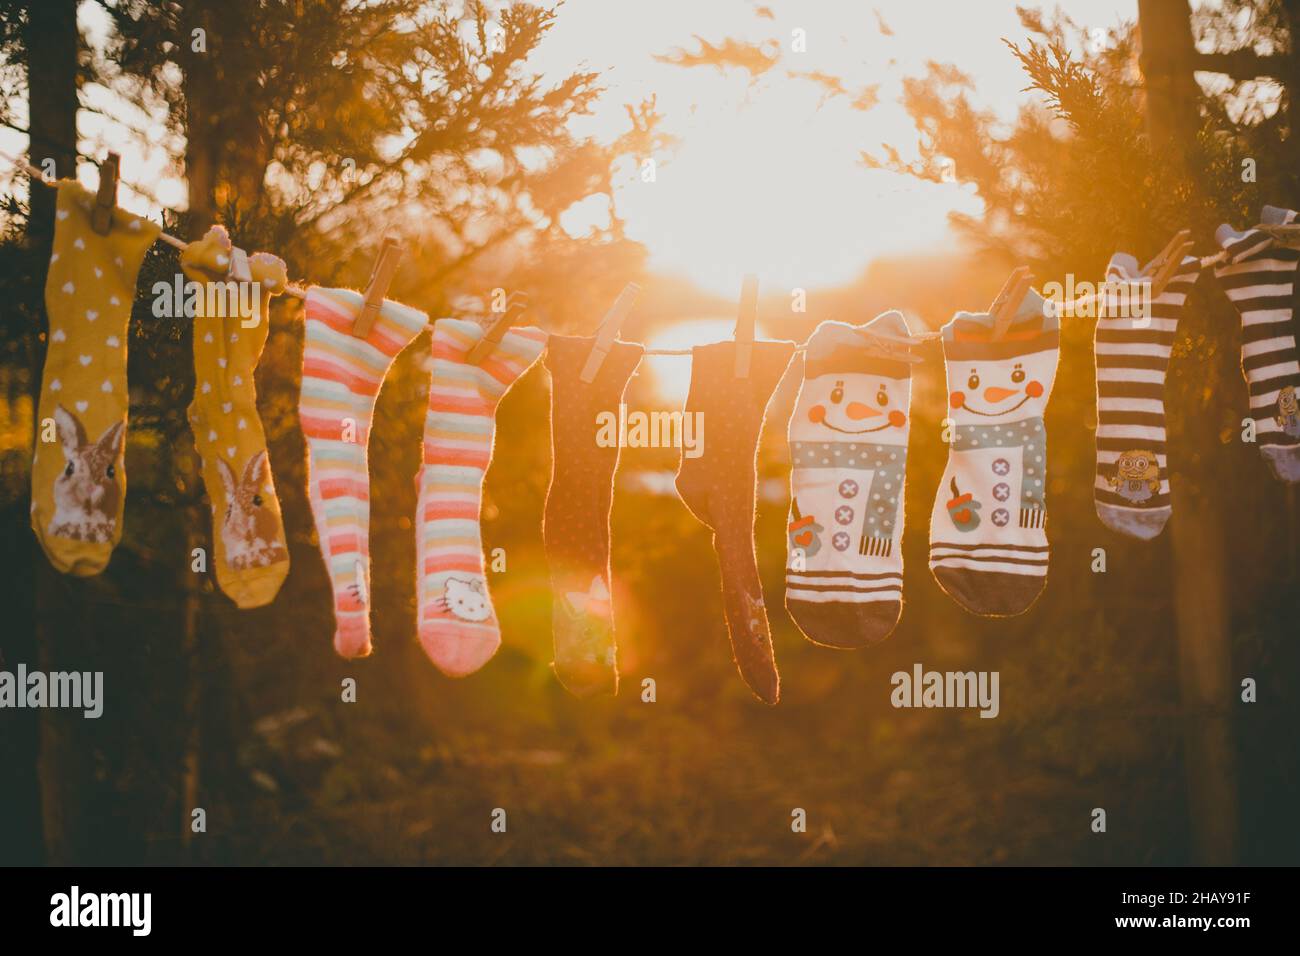 Five pairs of novelty socks hanging on a clothes line drying in sun Stock Photo